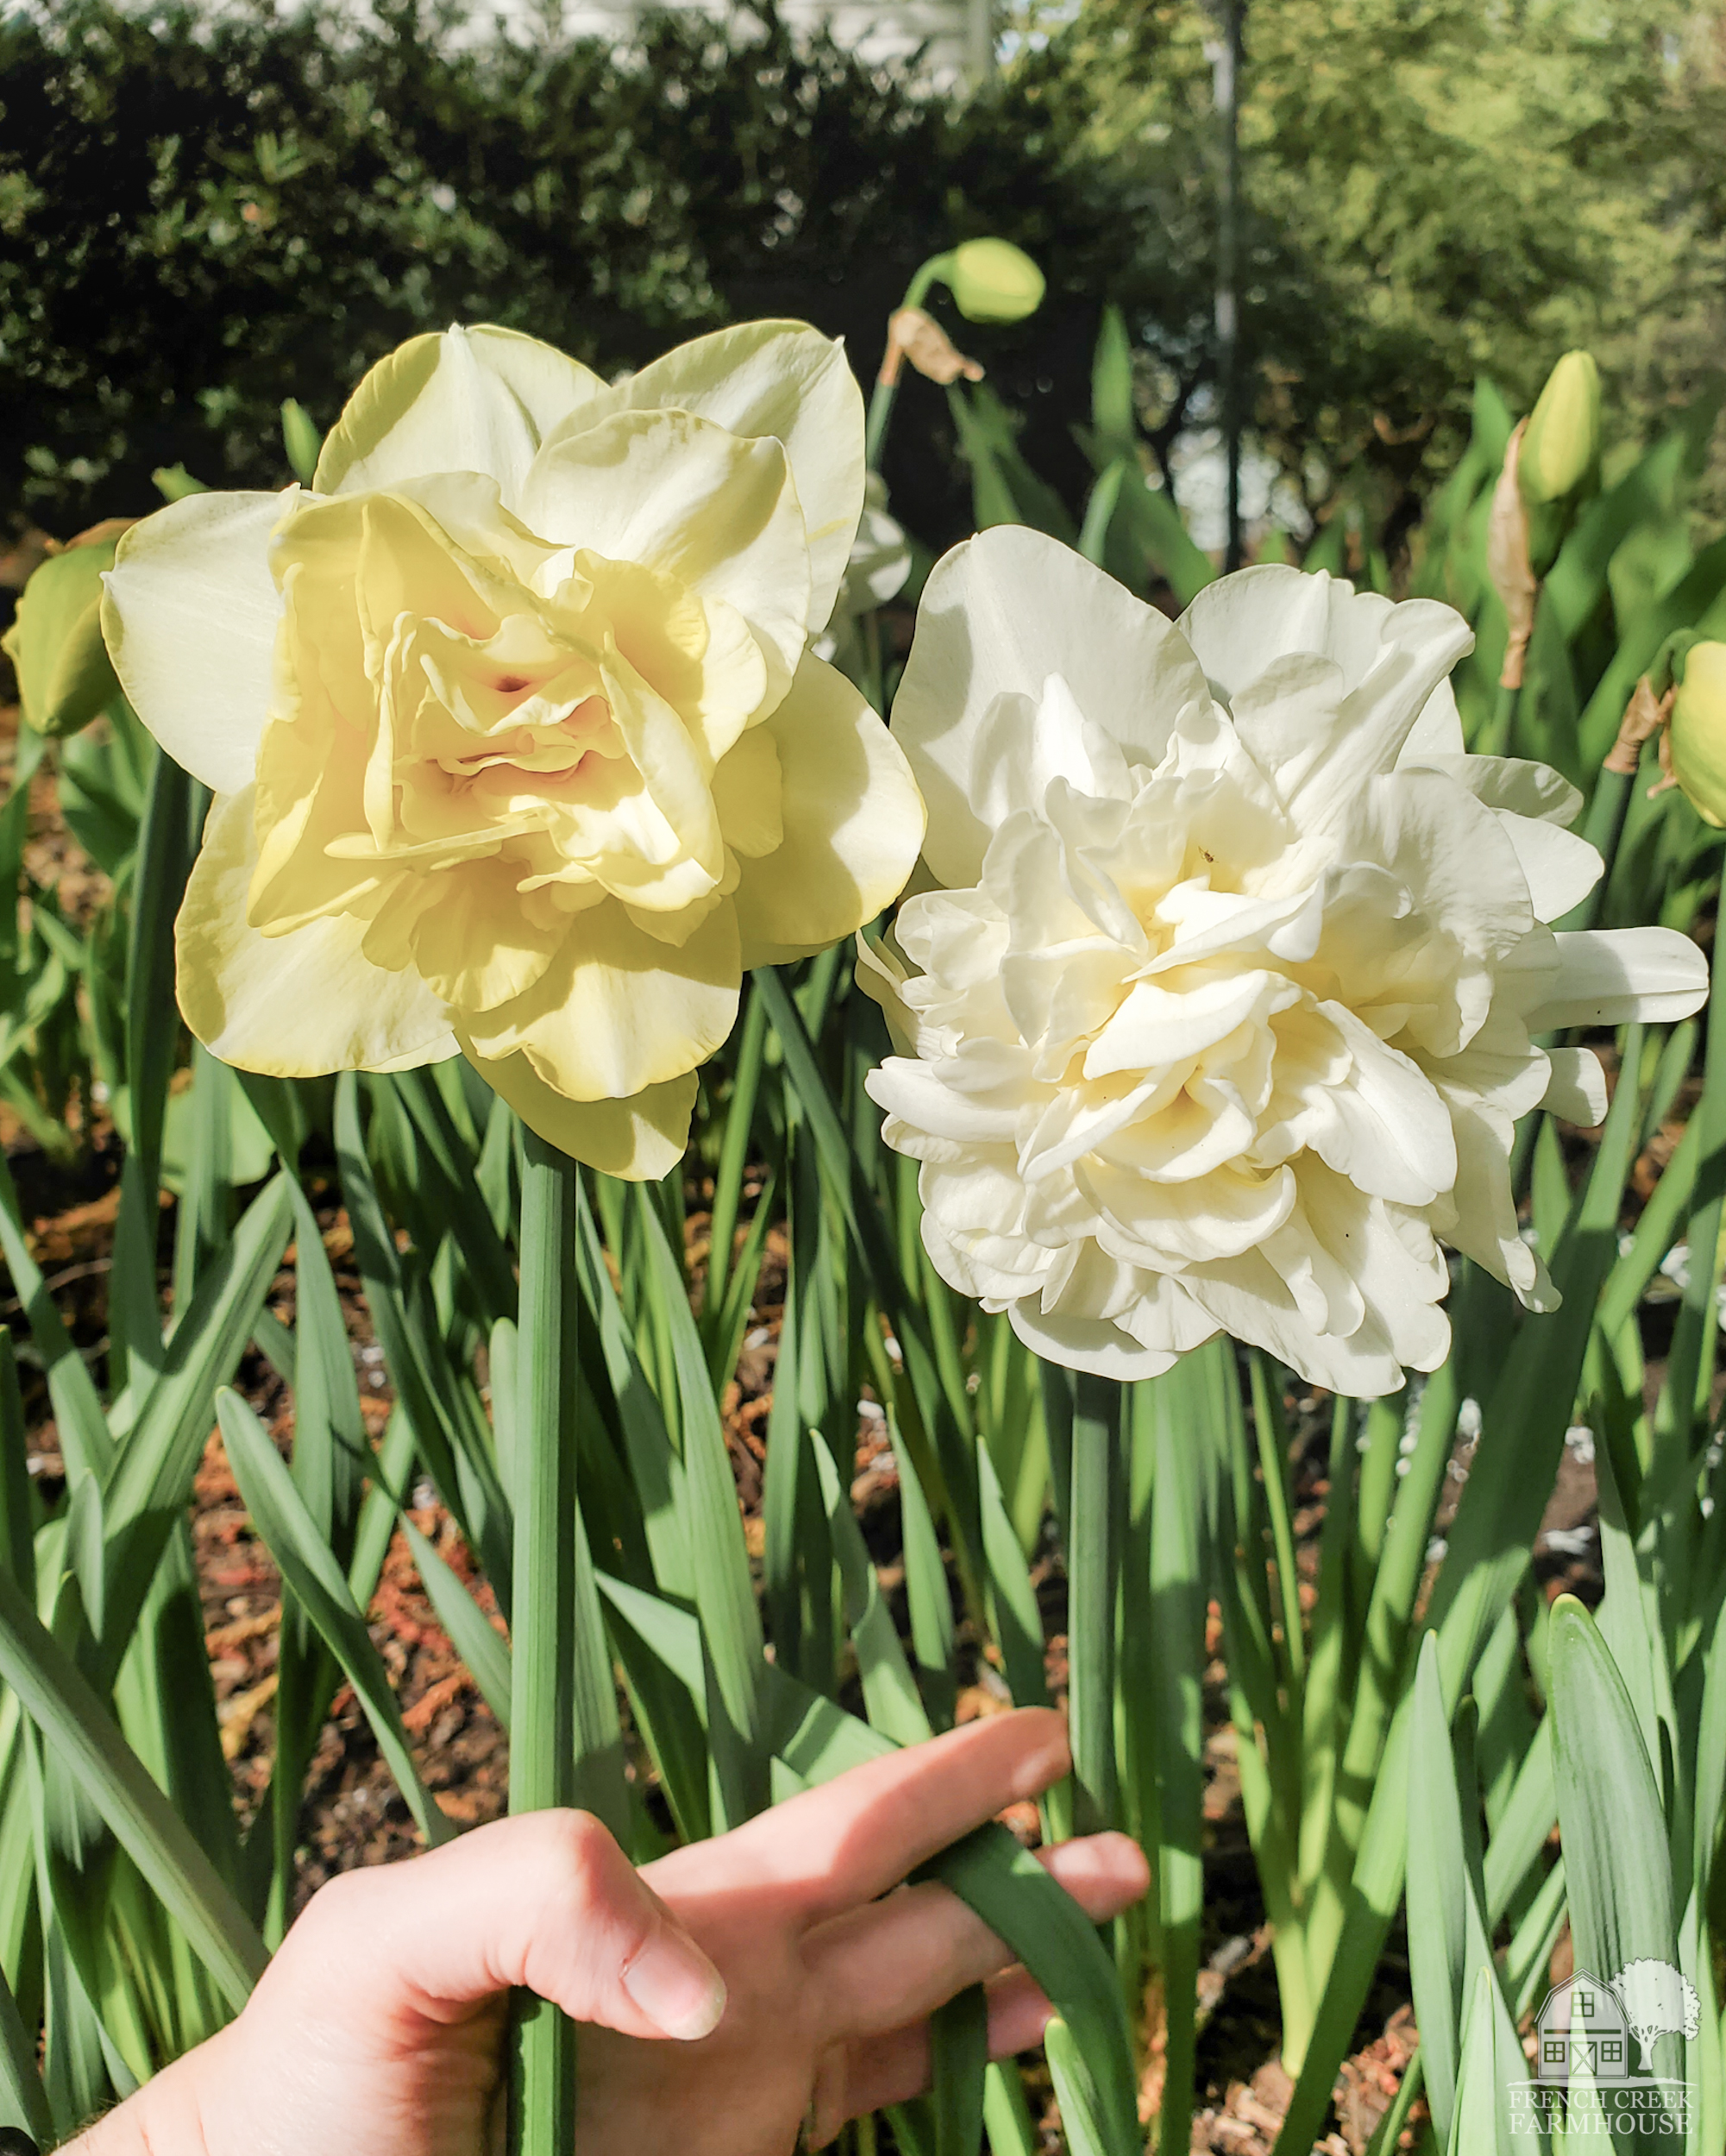 Comparing early and mid-season daffodils